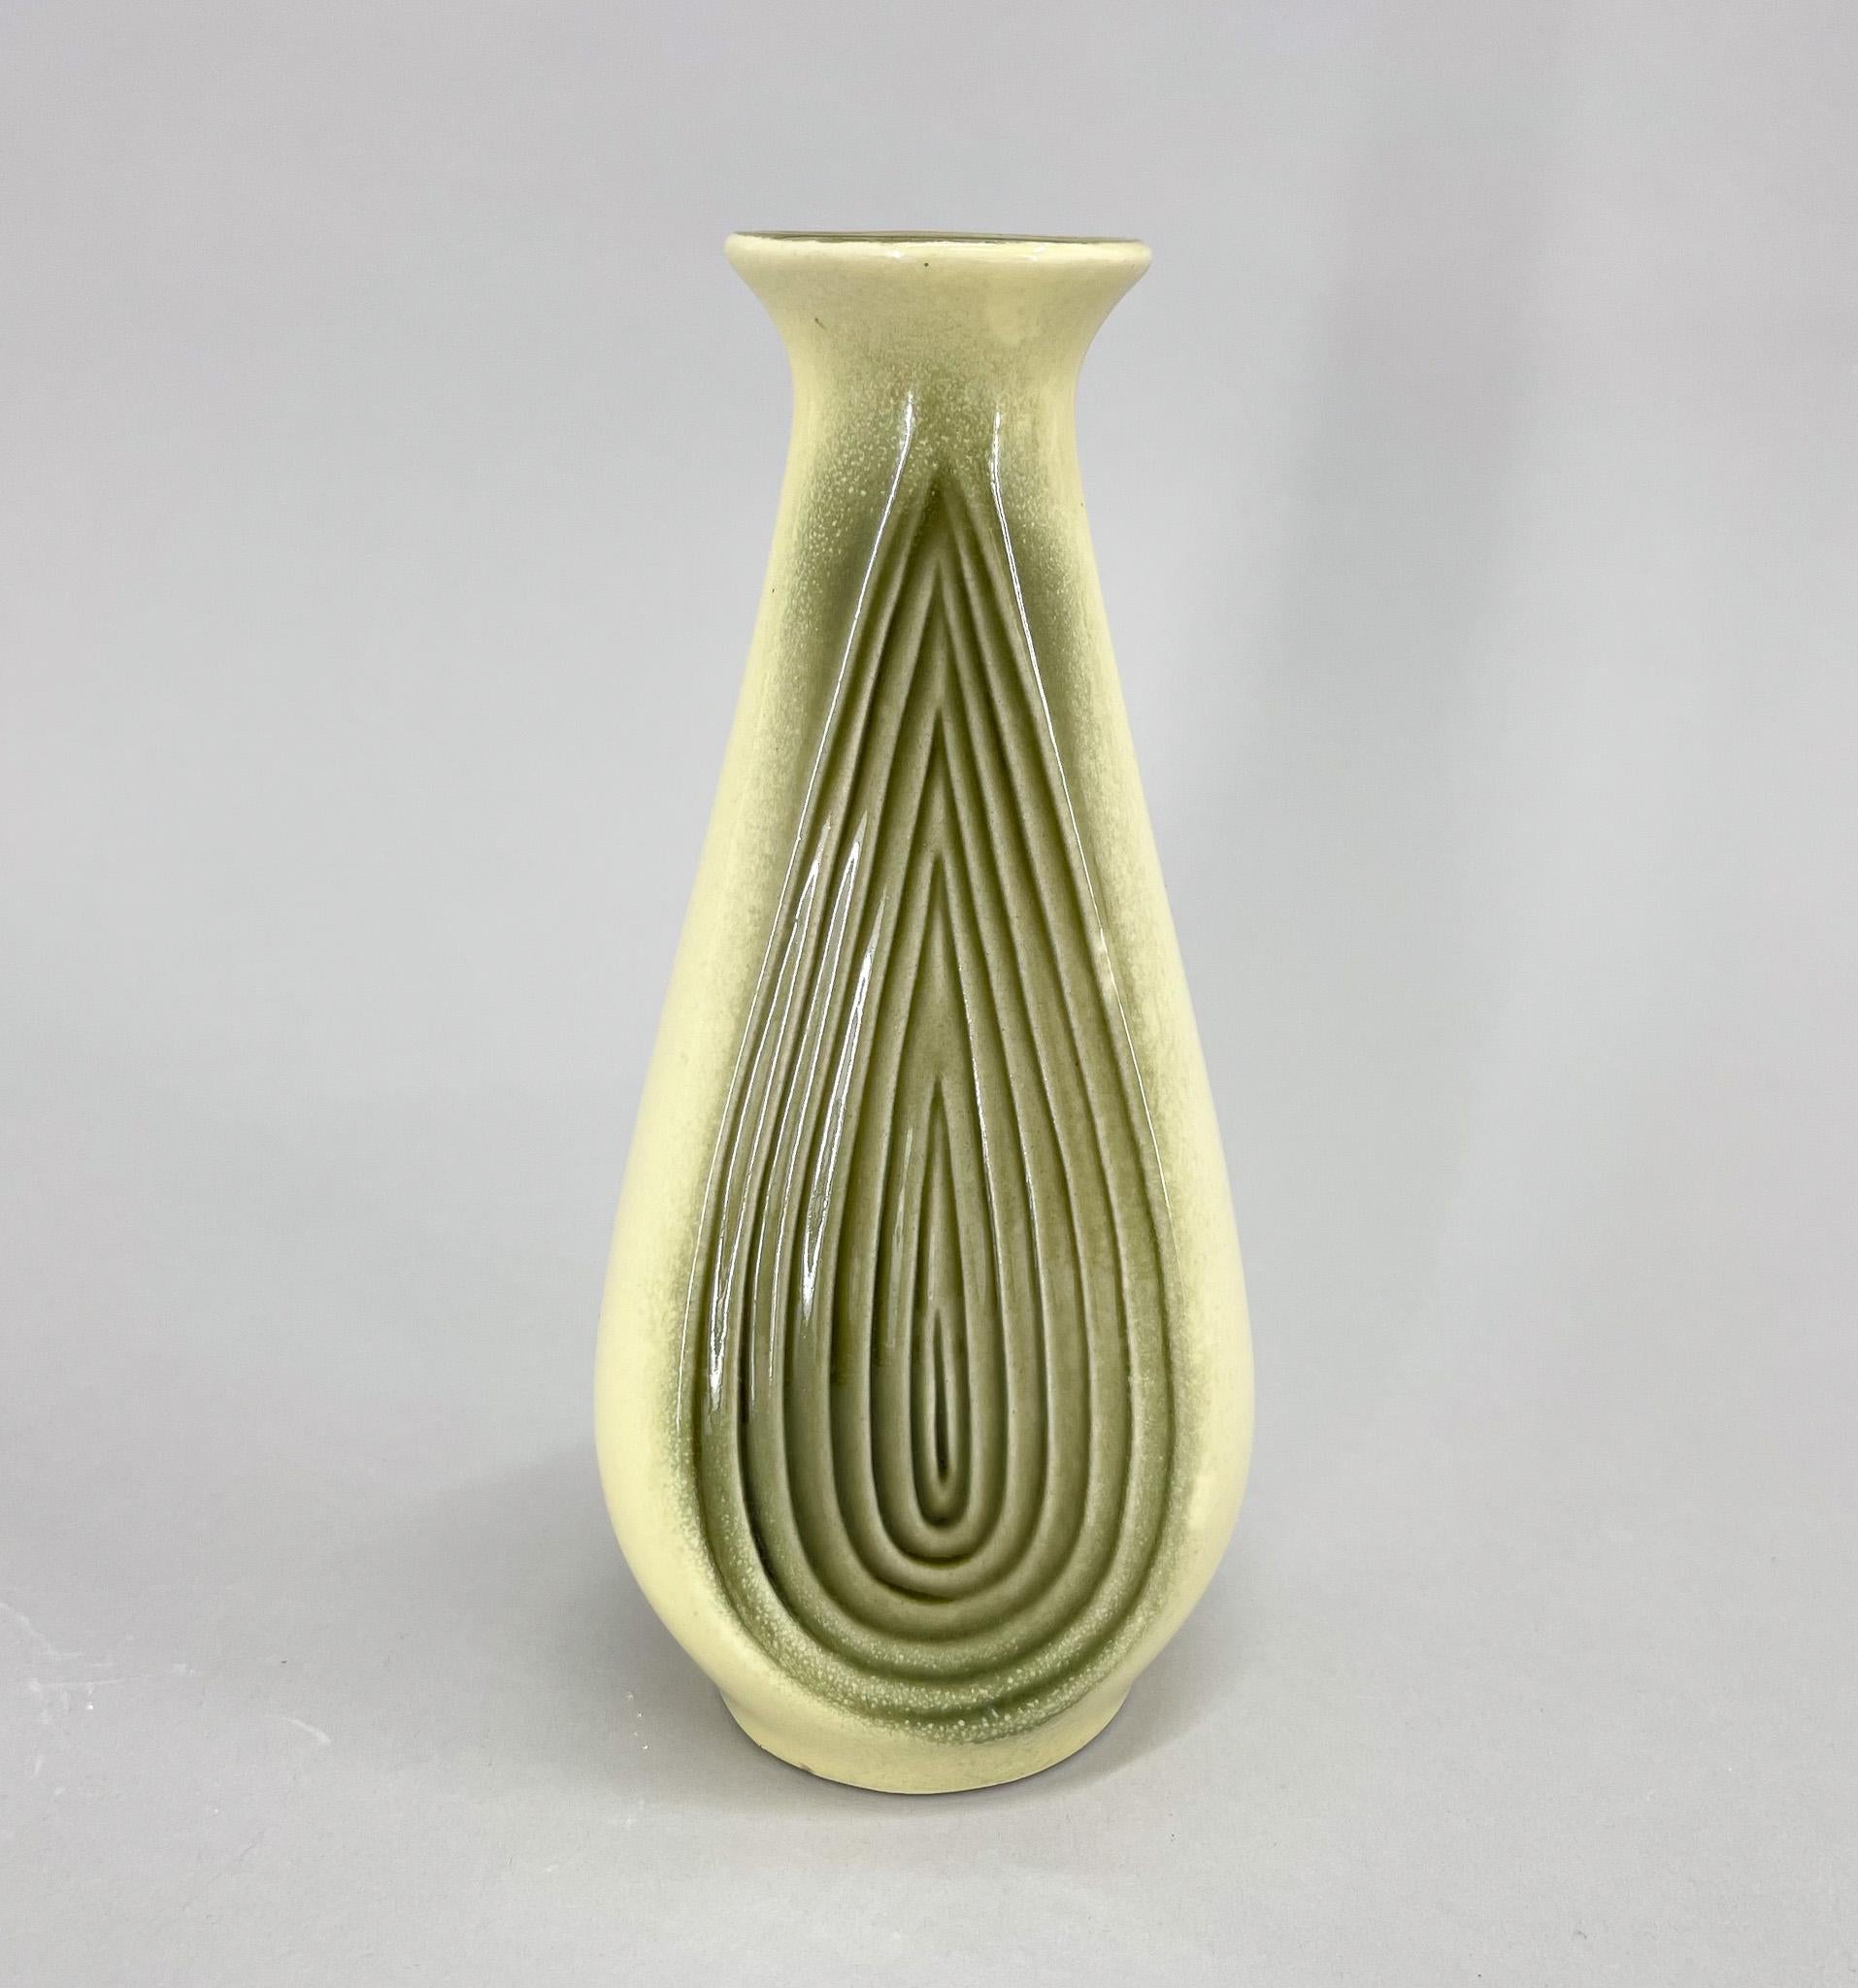 Vintage vase made by Ditmar Urbach in Czechoslovakia in 1960's. Very good vintage condition. 